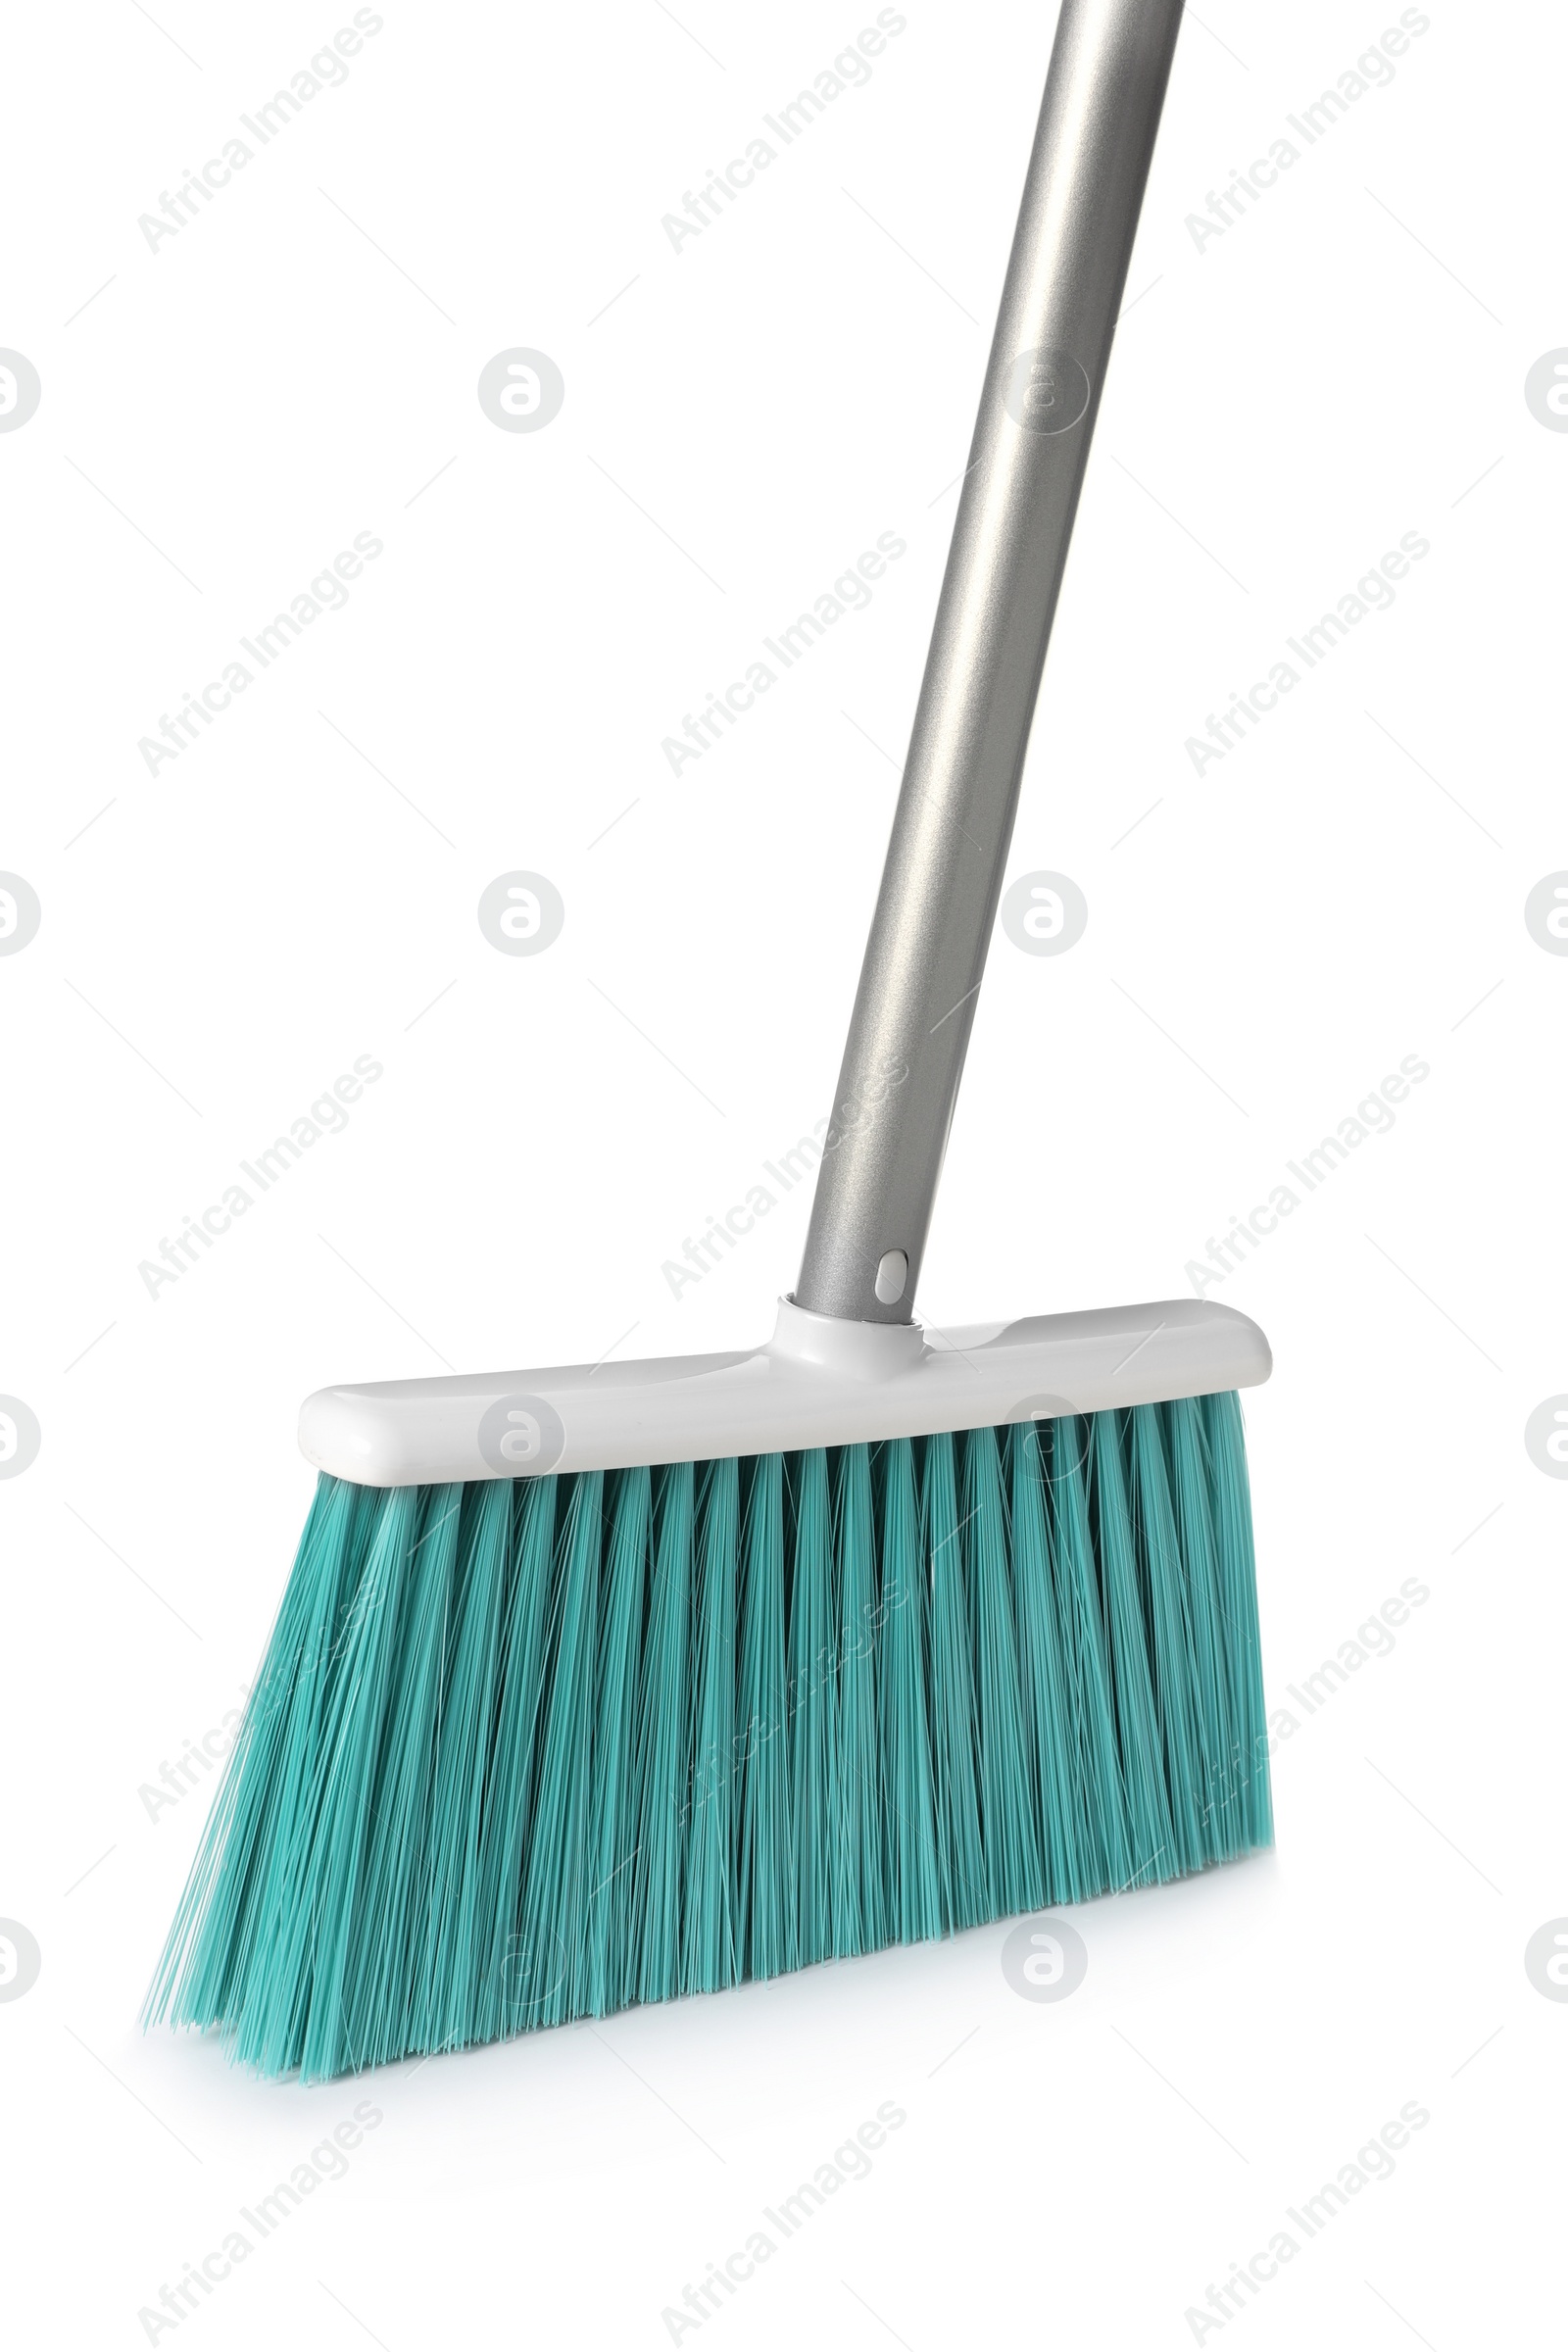 Photo of Plastic broom on white background. Cleaning tool